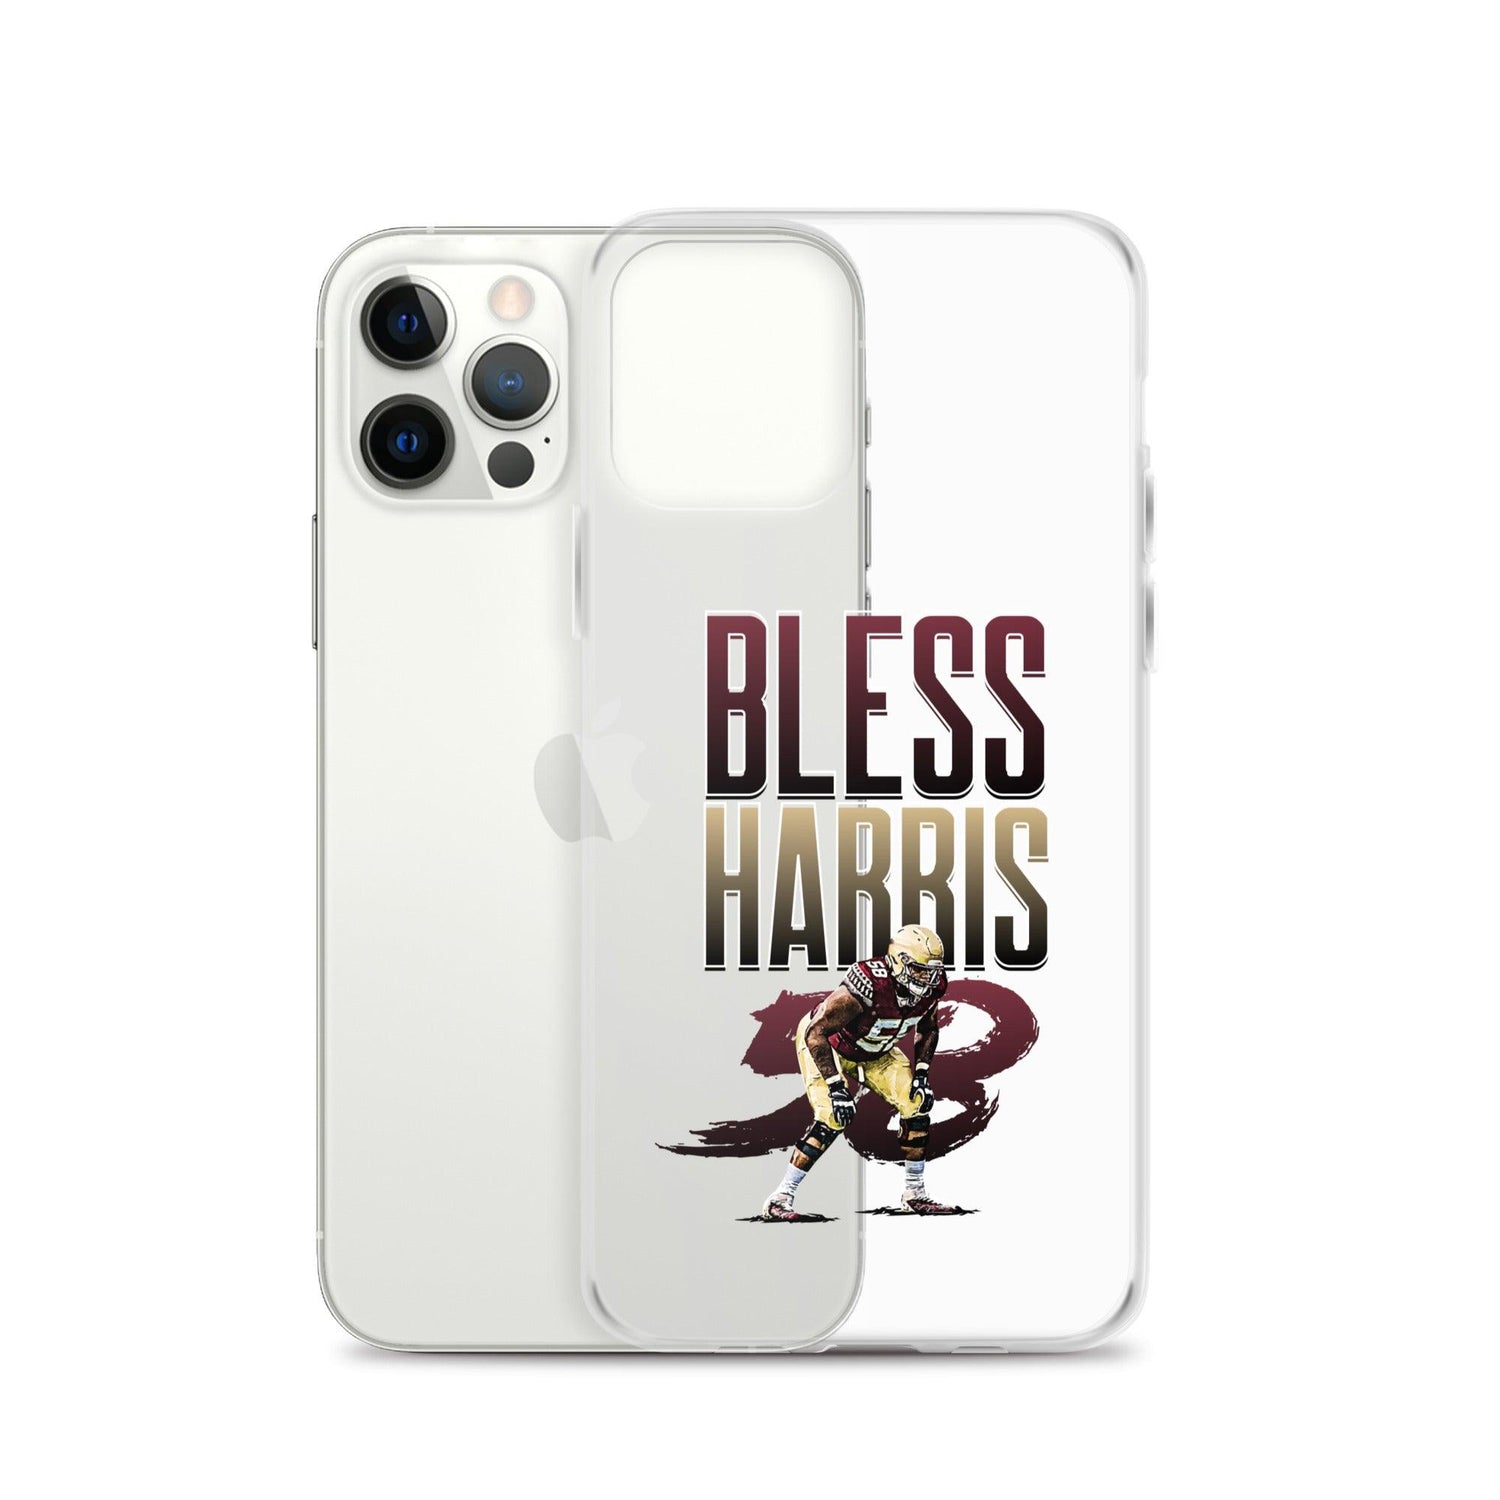 Bless Harris "Gameday" iPhone Case - Fan Arch